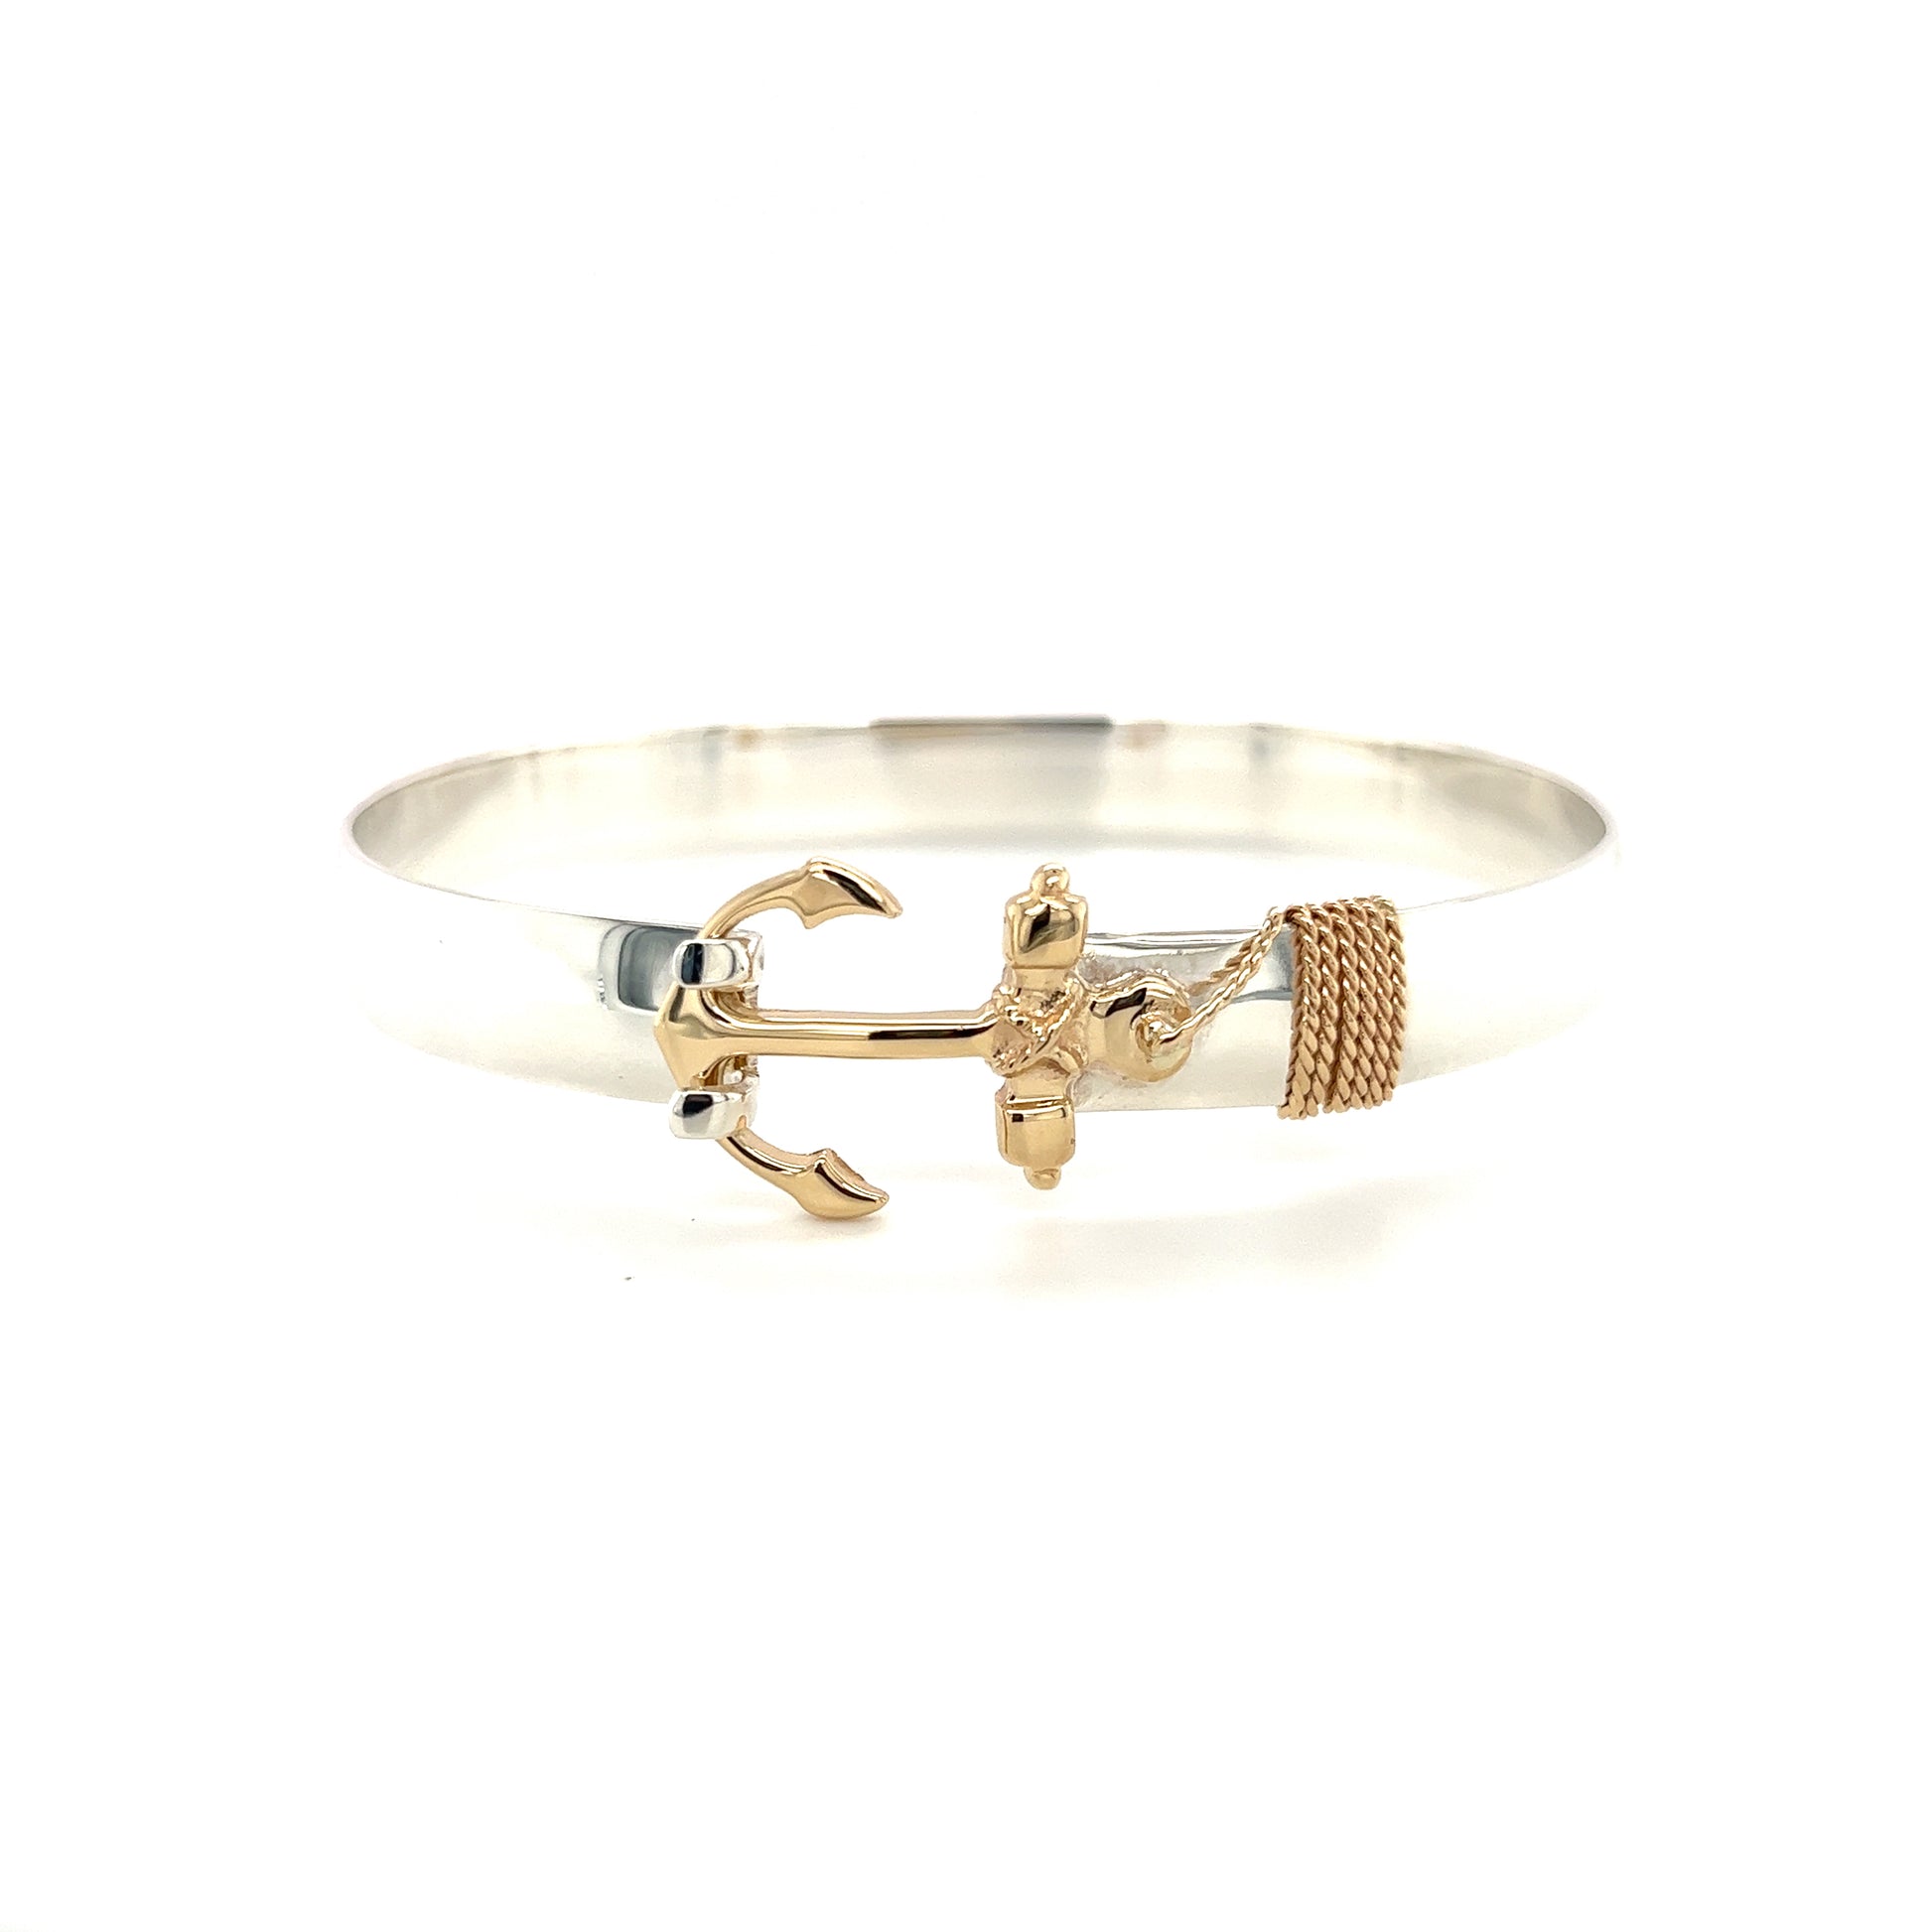 Flat 8mm Bangle Bracelet with 14K Yellow Gold Anchor and Wrap in Sterling Silver Flat Front View